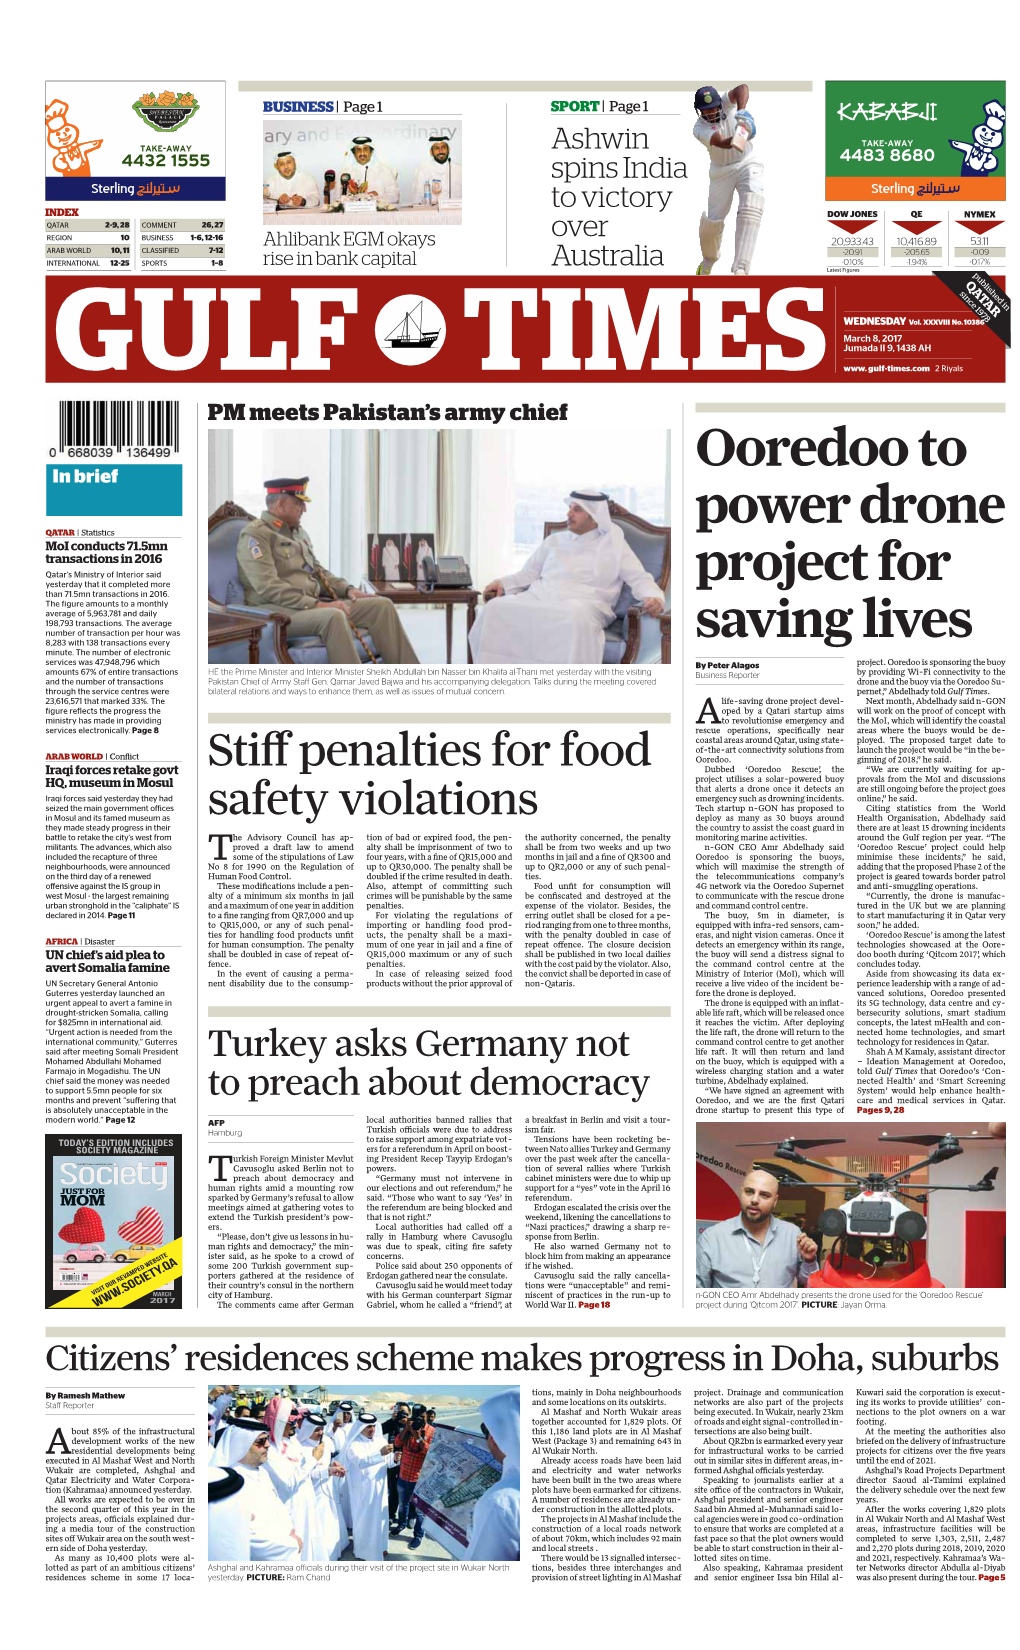 Ooredoo to Power Drone Project for Saving Lives